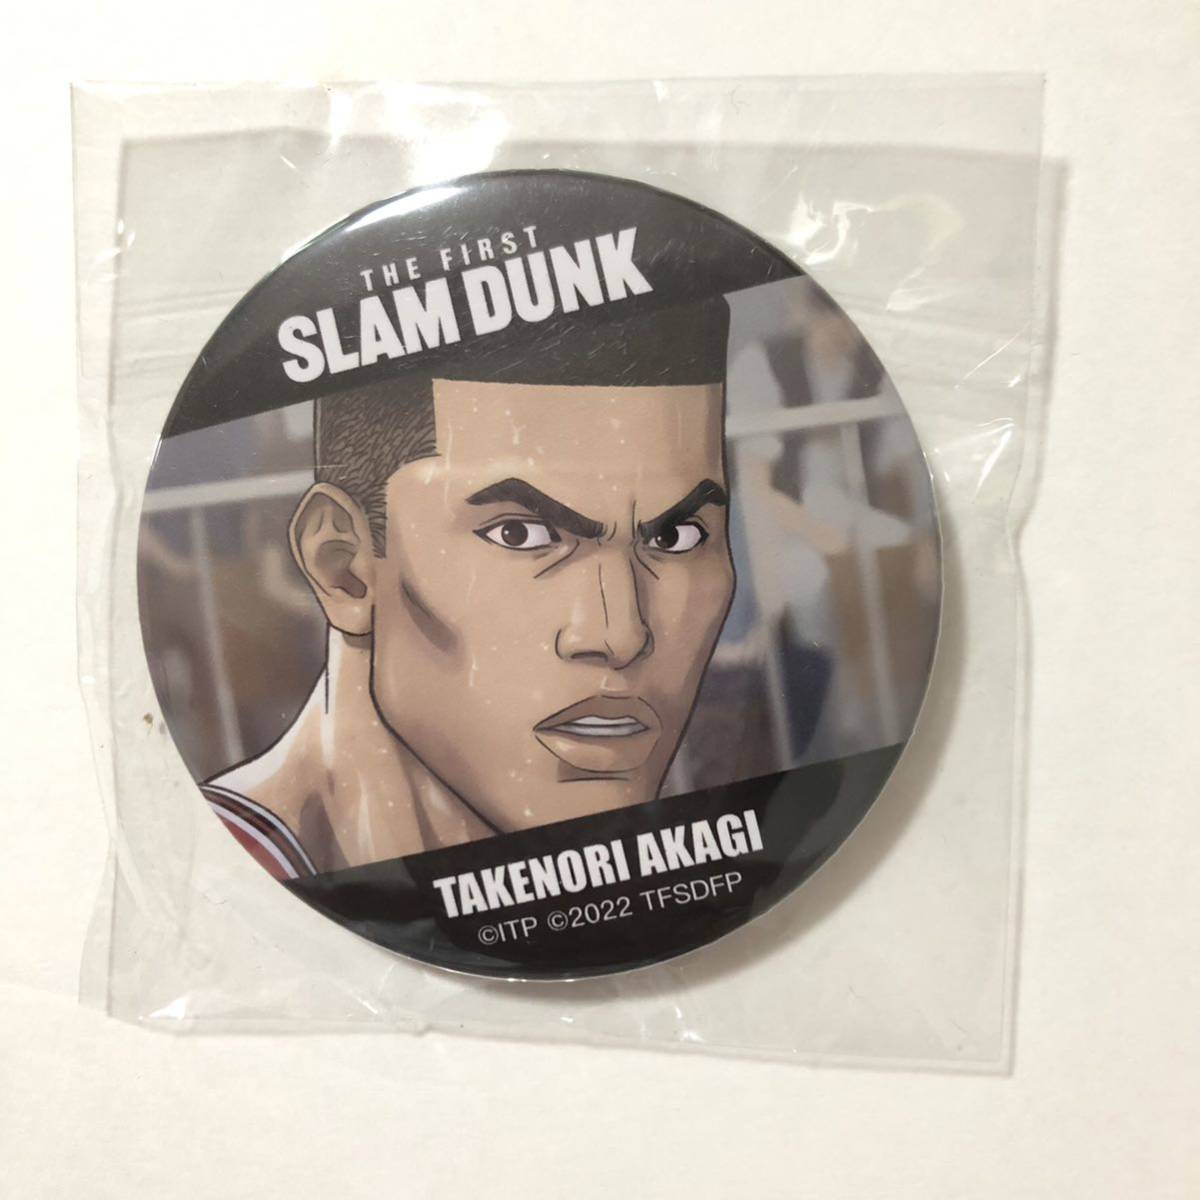 THE FIRST SLAM DUNK 缶バッジ 赤木剛憲_画像1